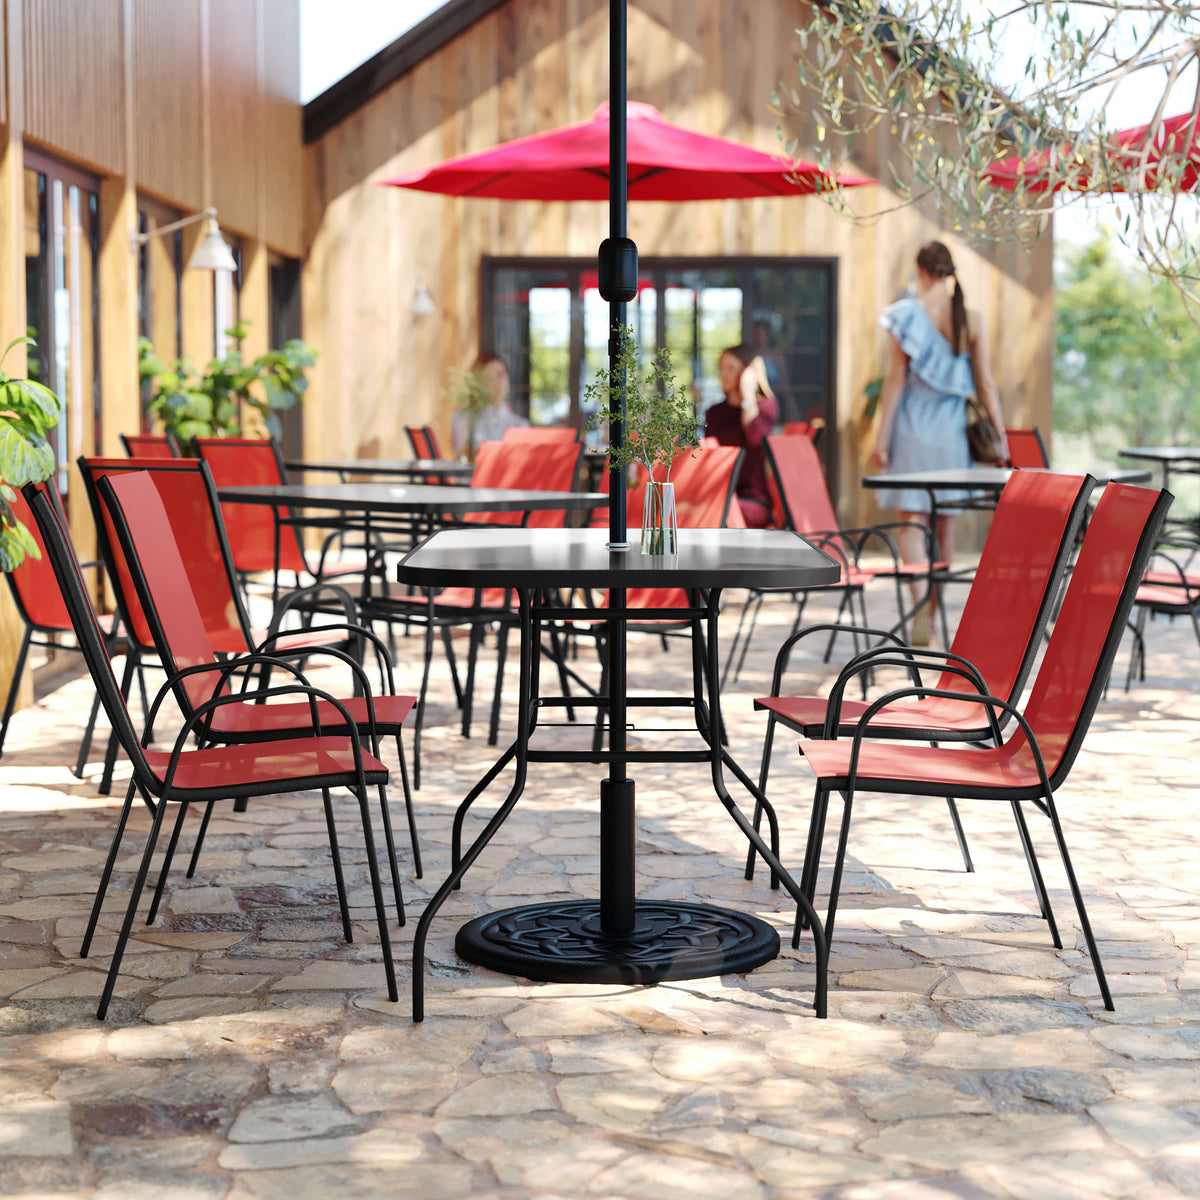 Red |#| Commercial 5 Pc Outdoor Patio Dining Set with Glass Table and 4 Chairs - Red